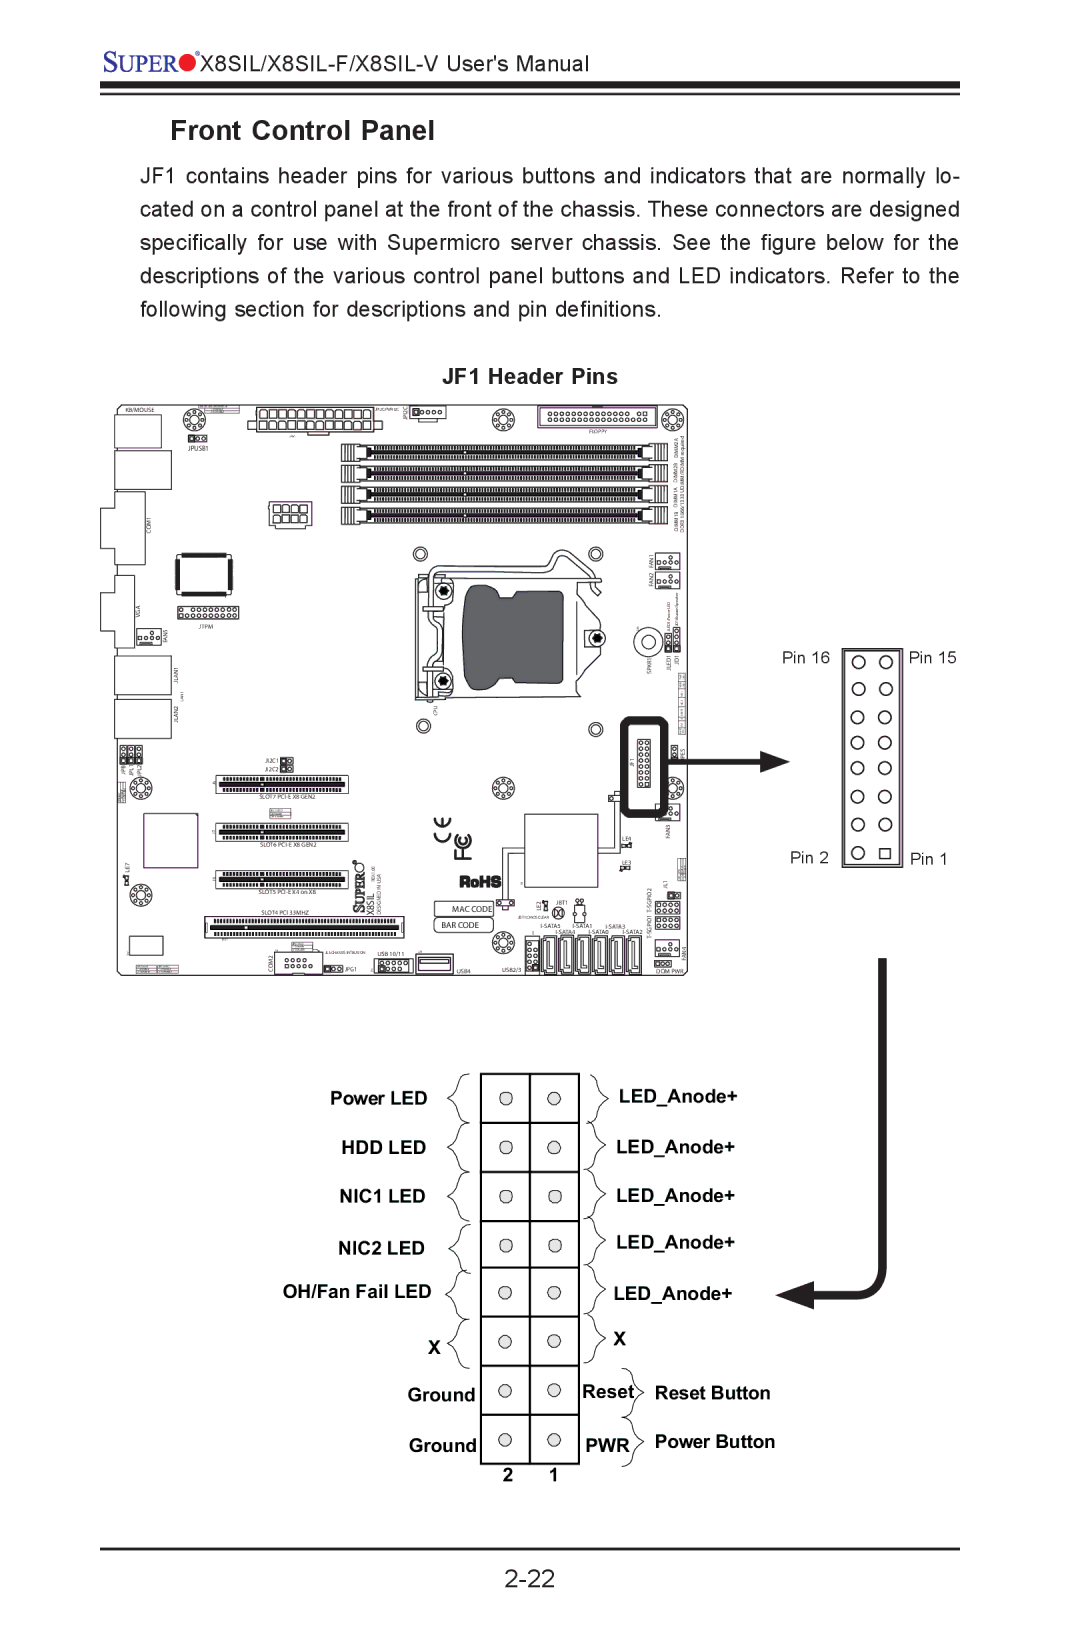 SUPER MICRO Computer X8SIL-V, X8SIL-F user manual Front Control Panel, JF1 Header Pins 